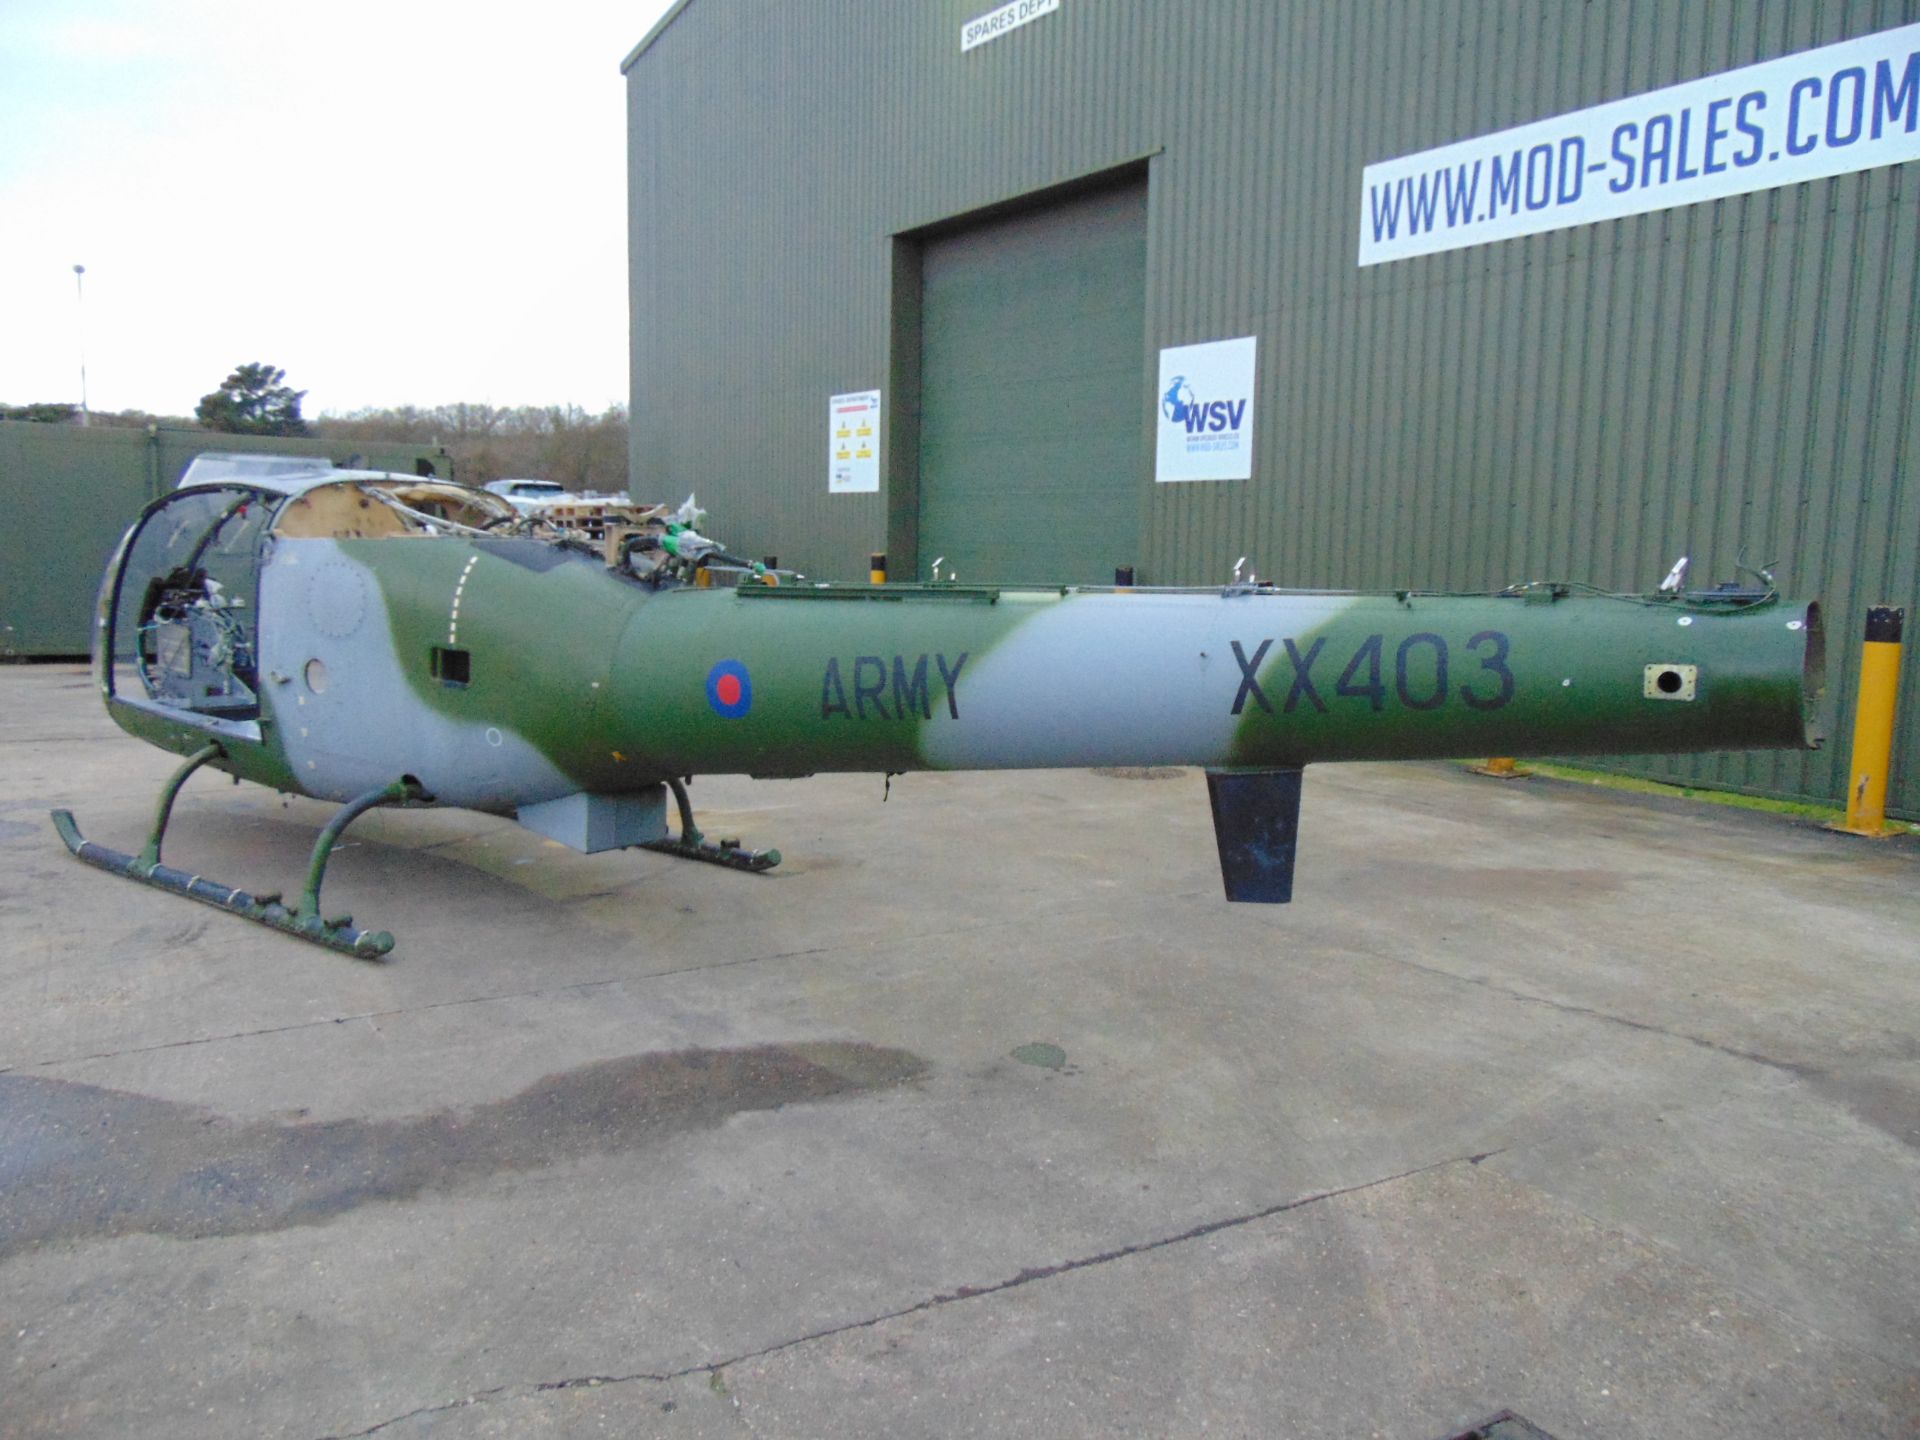 Gazelle AH 1 Turbine Helicopter Airframe (TAIL NUMBER XX403) - Image 8 of 28